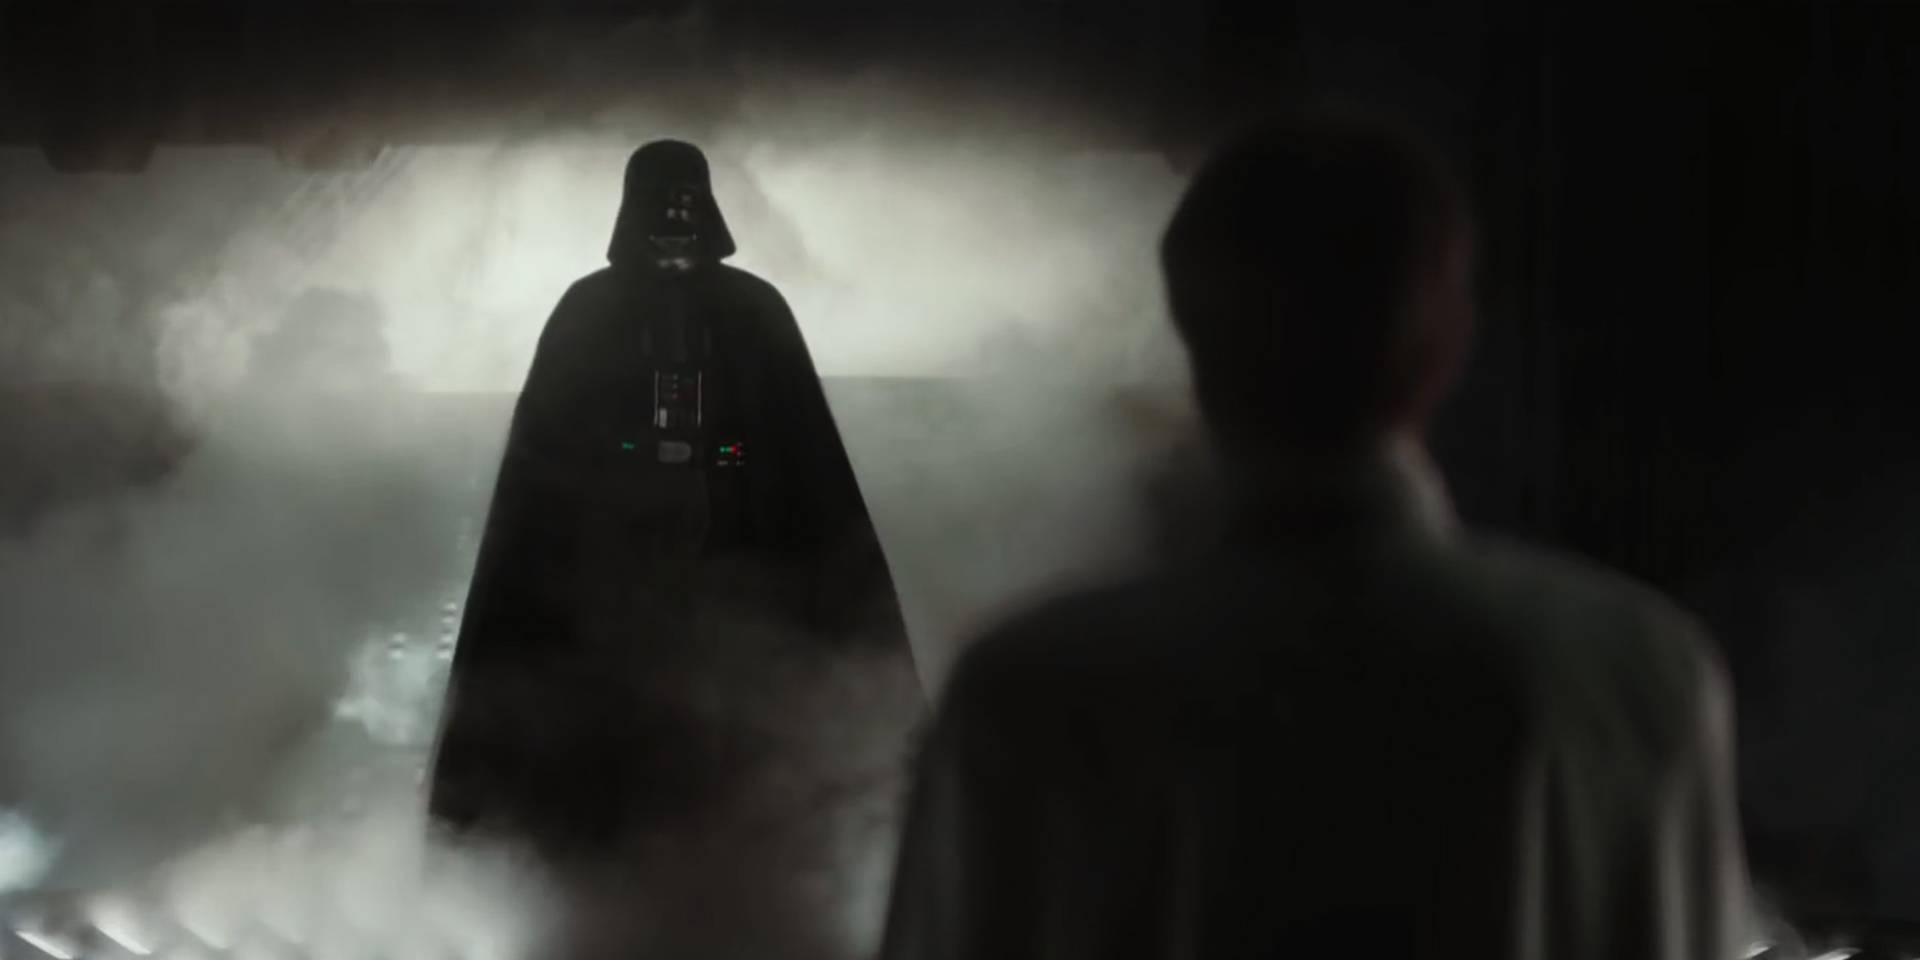 Darth vader rogue one A star wars story featured